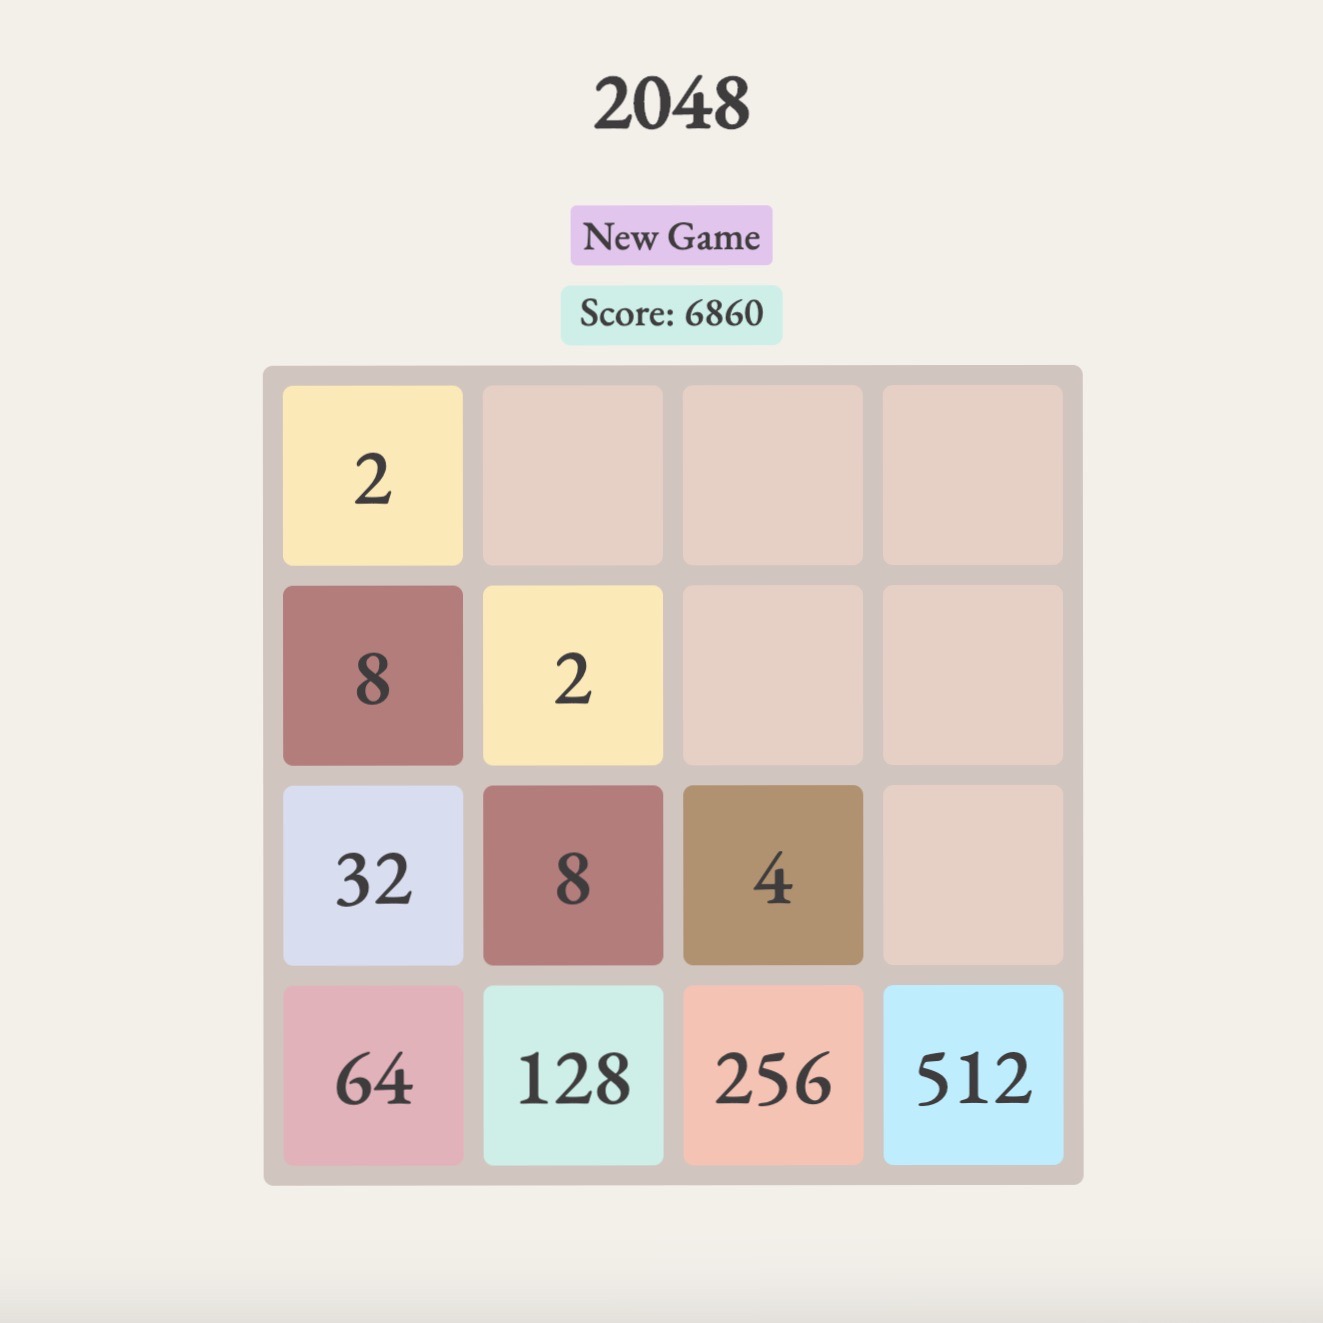 A picture of a dupe of the game 2048. It has a title of 2048, a New Game button, a score display and a 4 by 4 grid for gameplay.